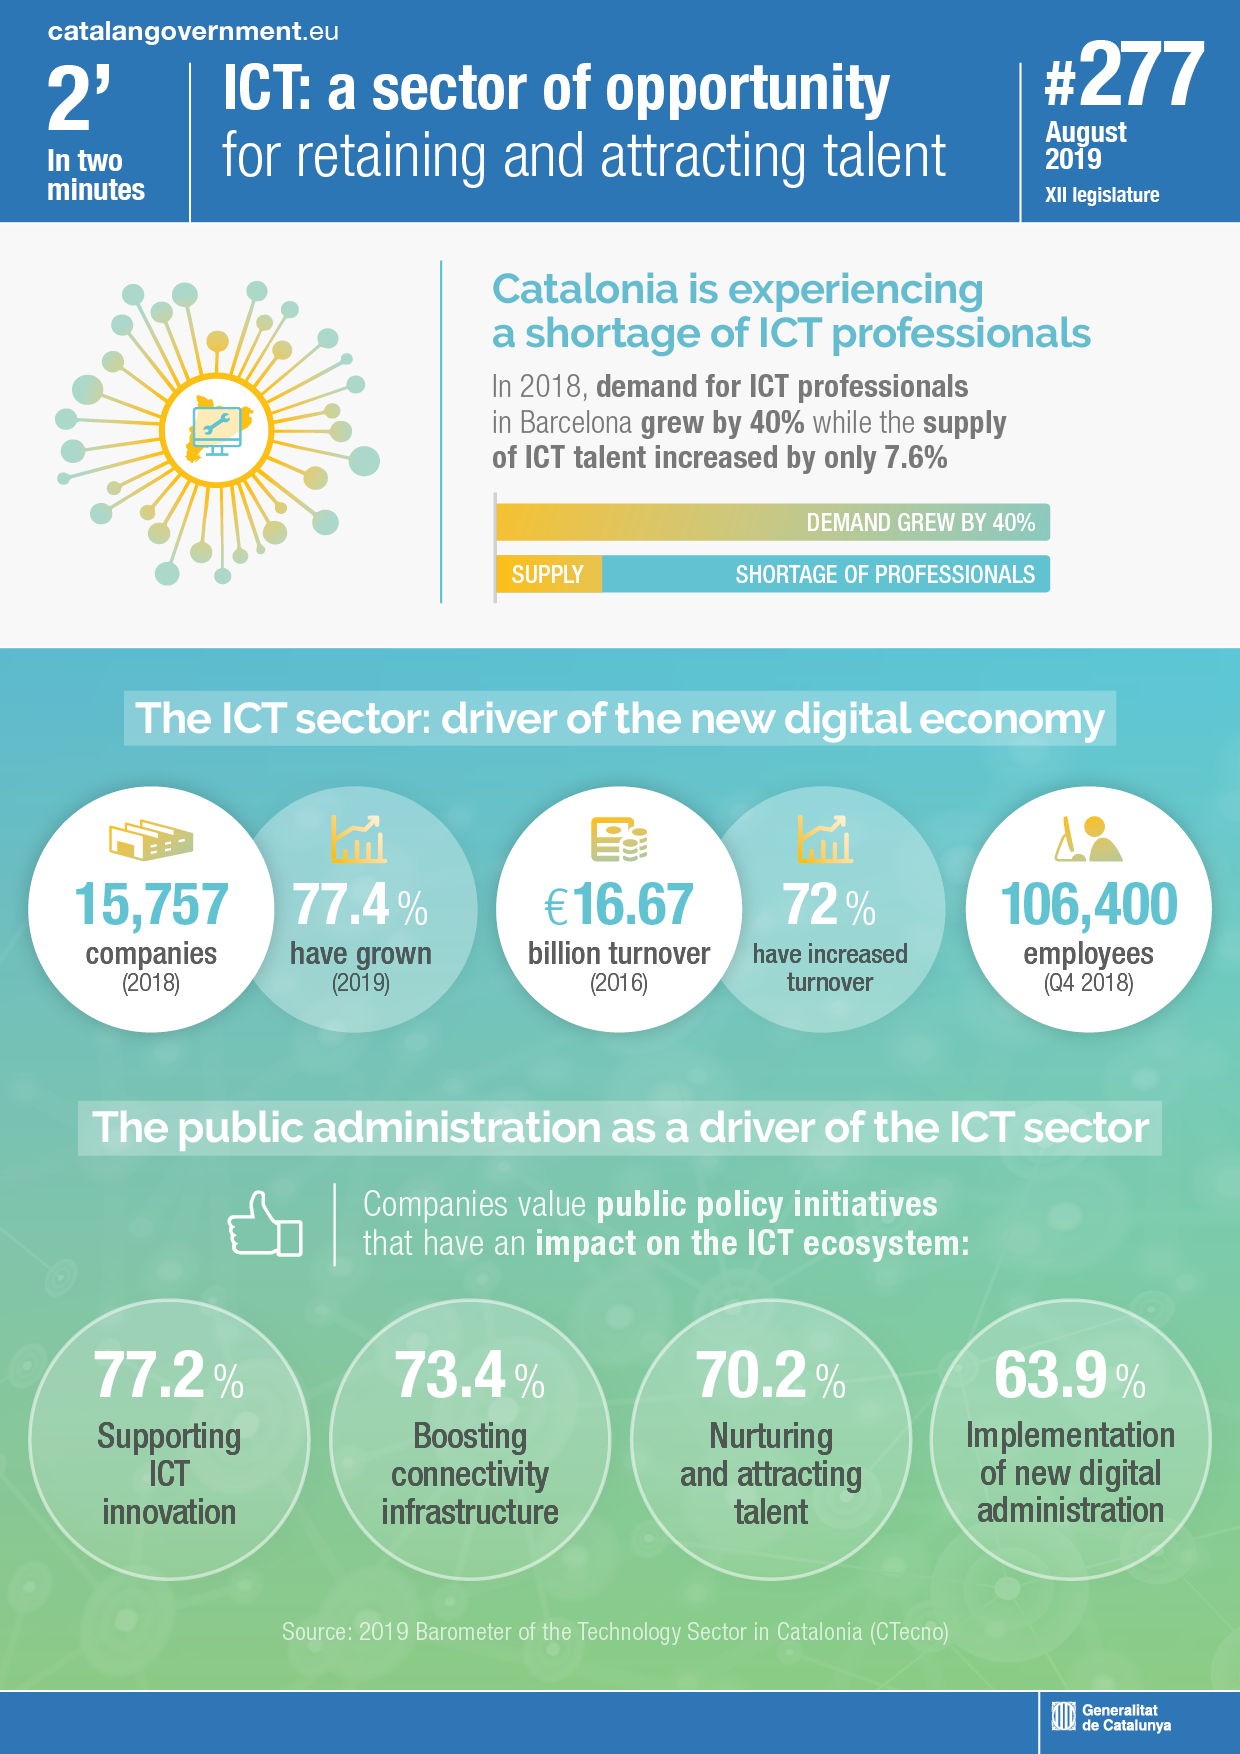 In 2018, demand for ICT professionals in Barcelona grew by 40% while the supply of ICT talent increased by only 7.6%.